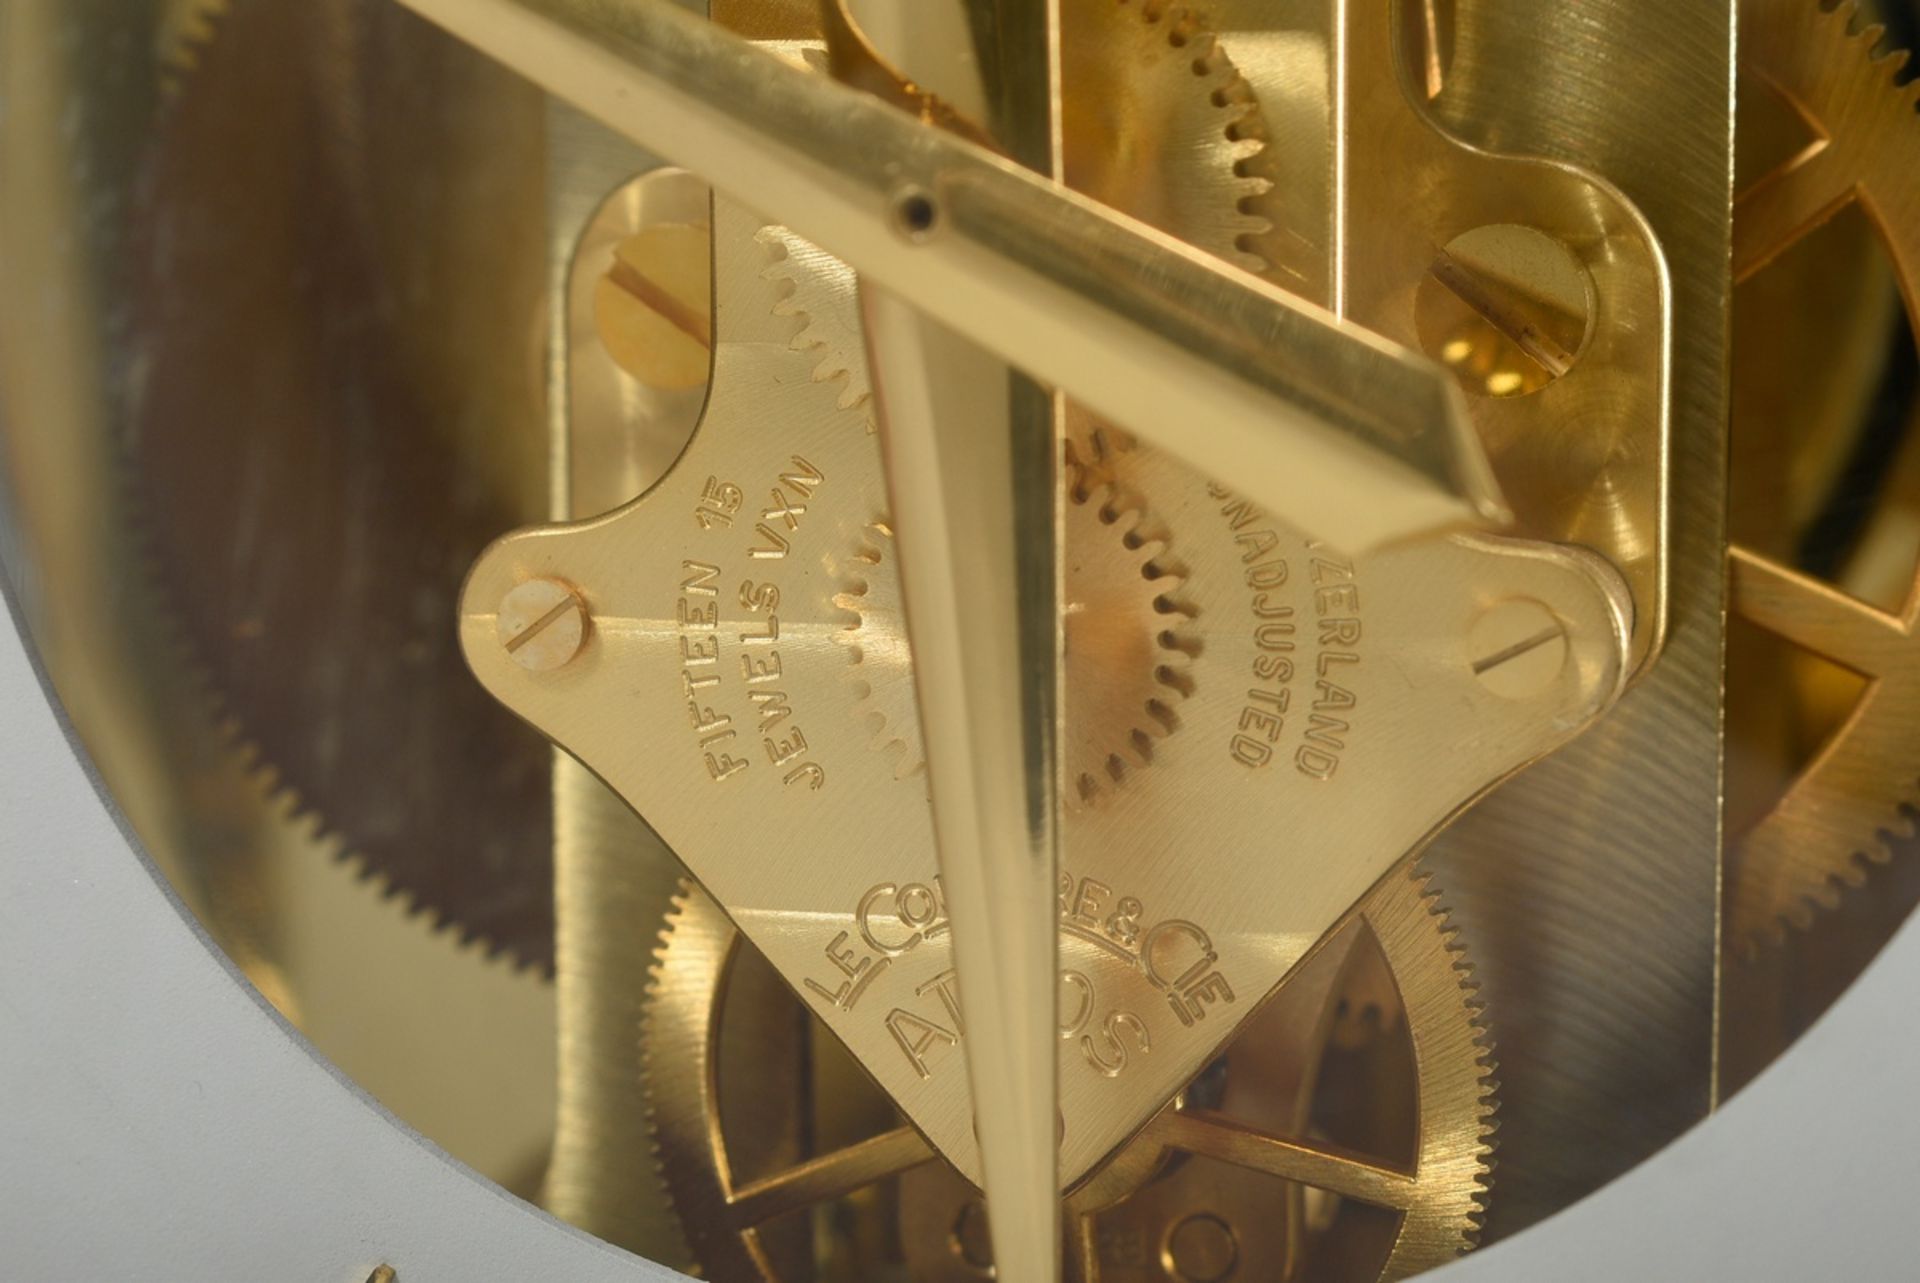 Jaeger Le Coultre "Atmos" table clock, glazed gold-plated brass case, movement number 196633, 23.5x - Image 4 of 7